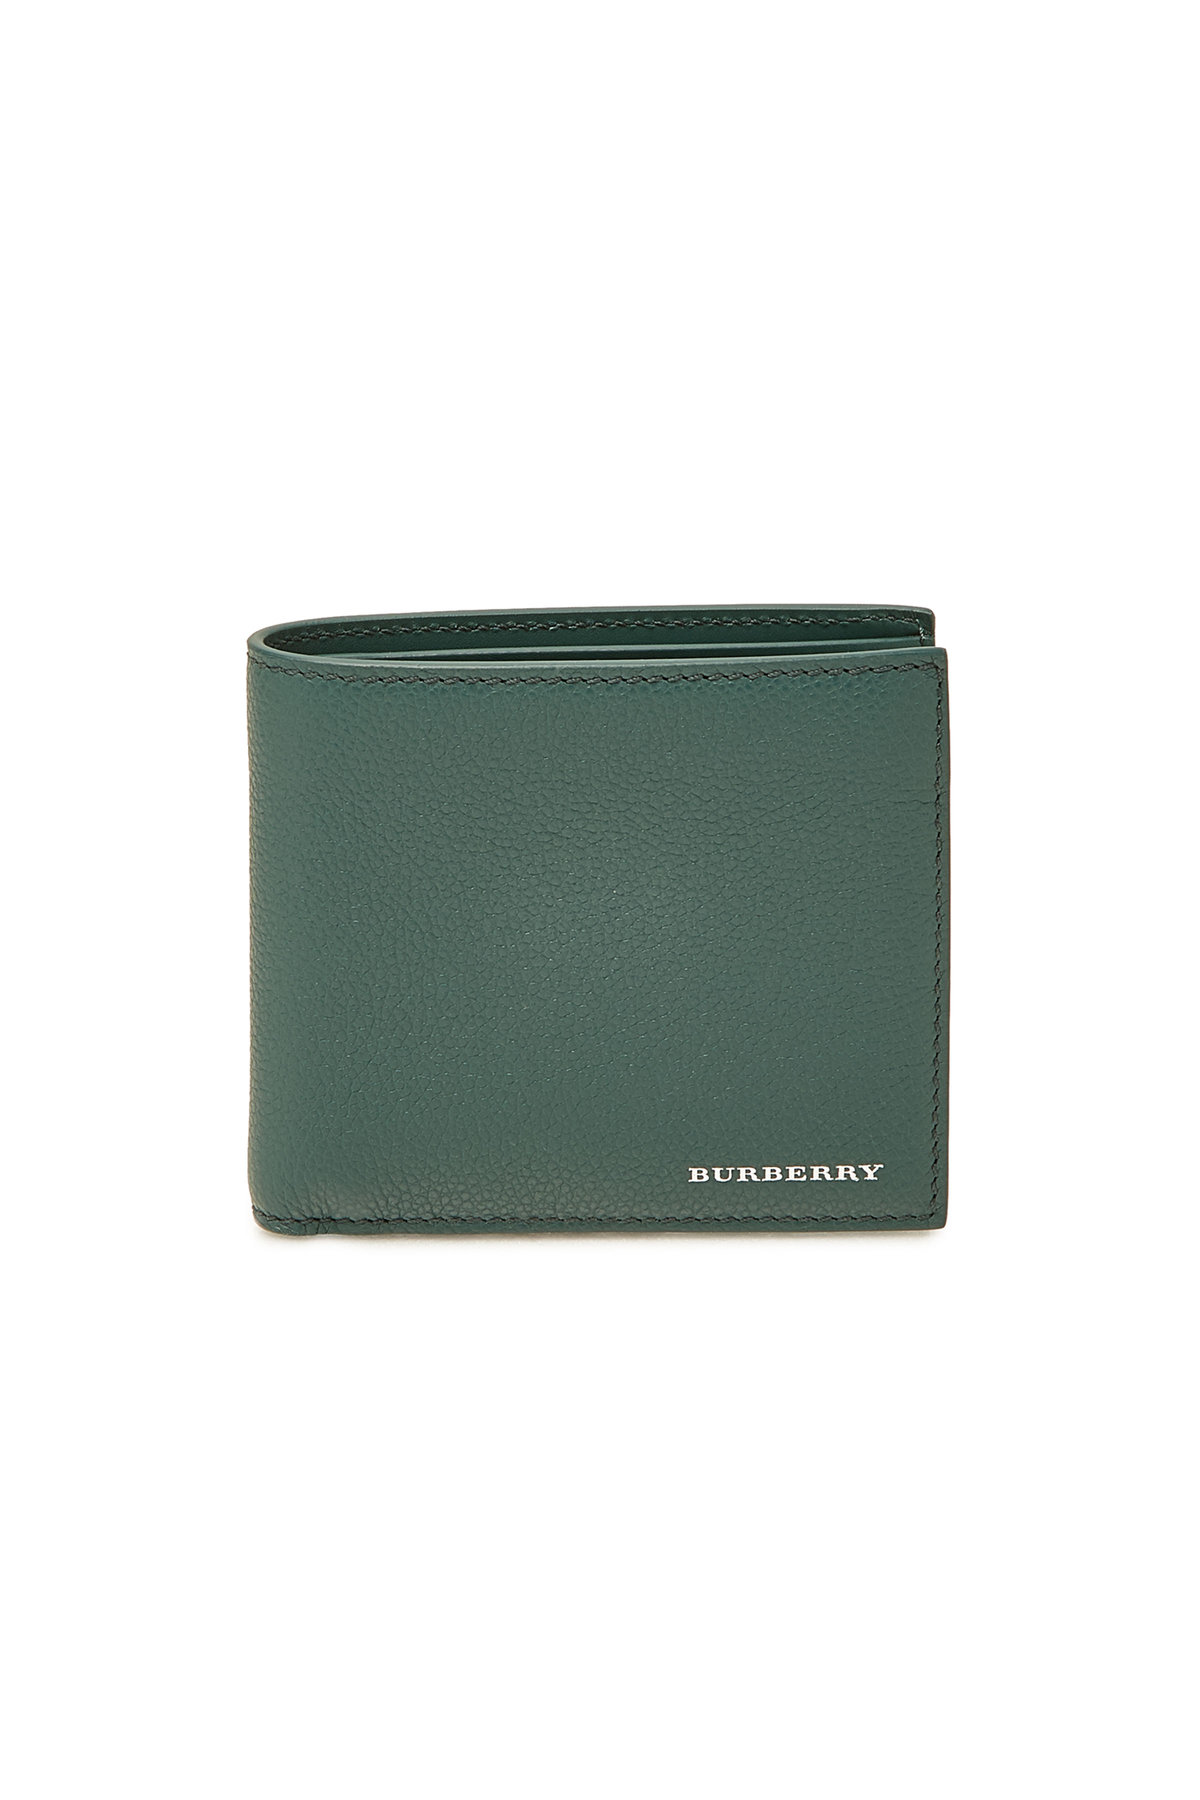 burberry wallet leather